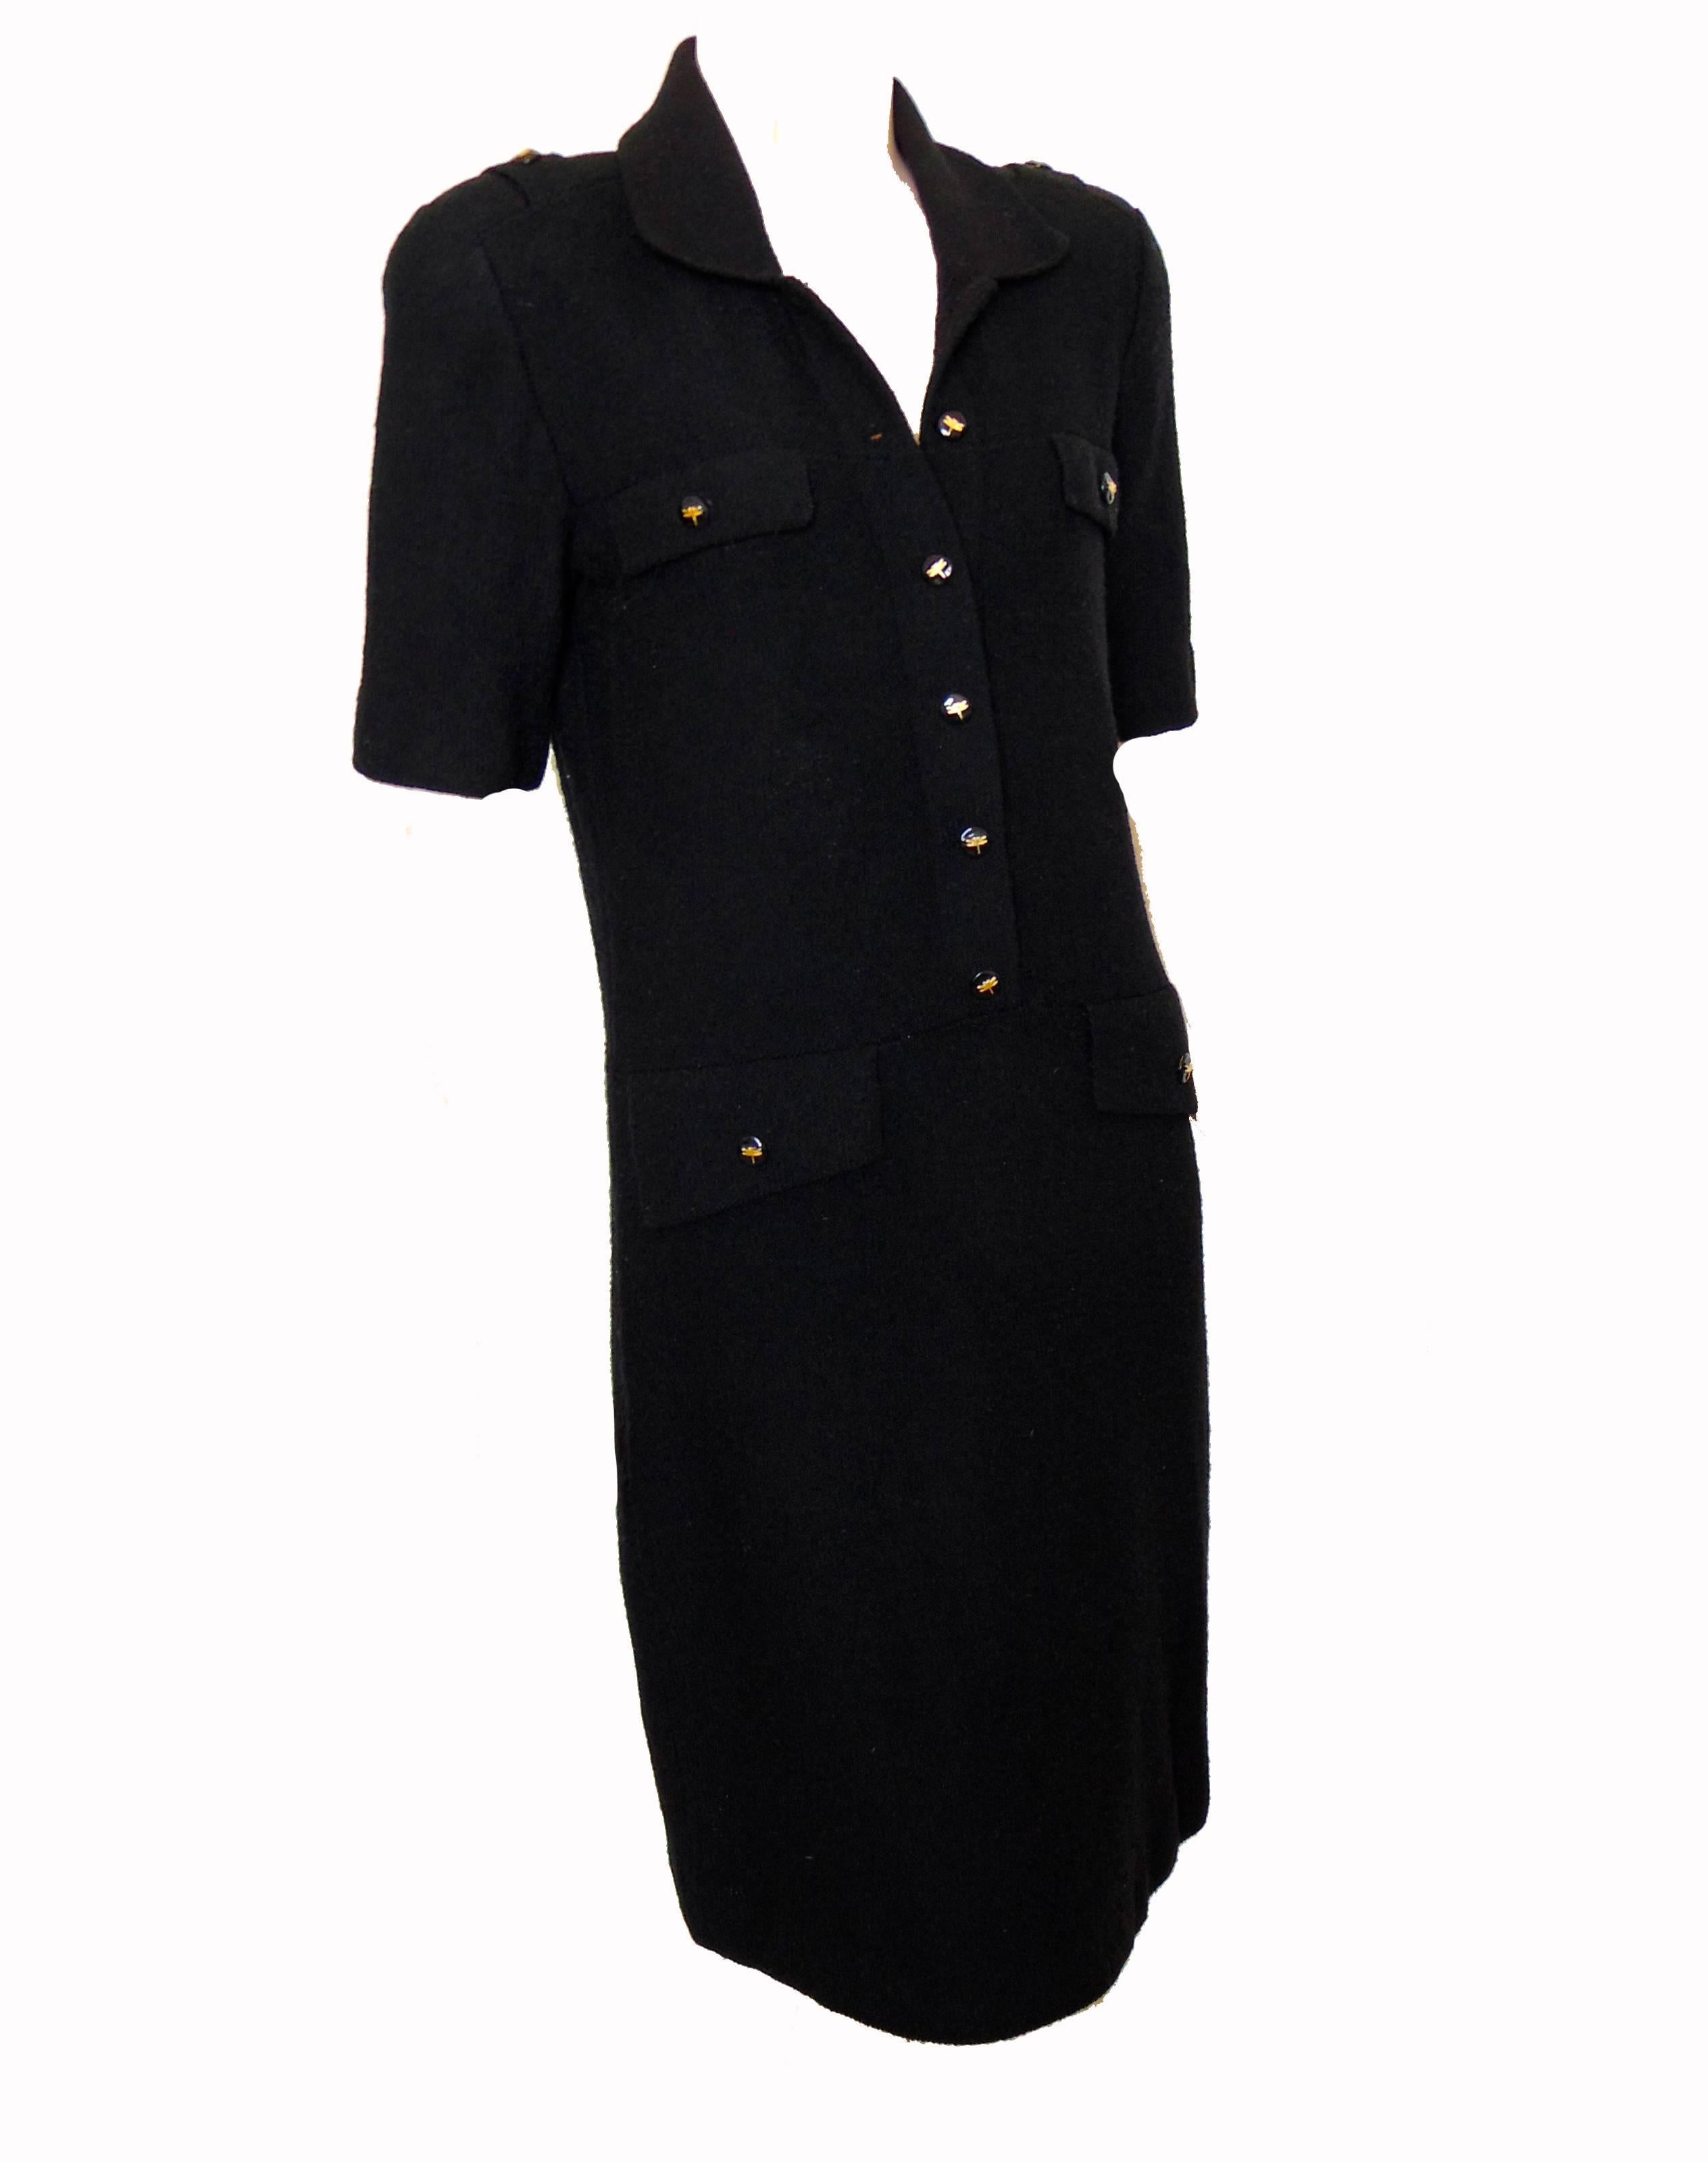 This black knit dress was made by Steve Fabrikant for Neiman Marcus, likely in the 1990s.  Unlined and in excellent condition, it fastens with several dragonfly embossed buttons.  No size tag, but we're estimating this as a modern size M, based on